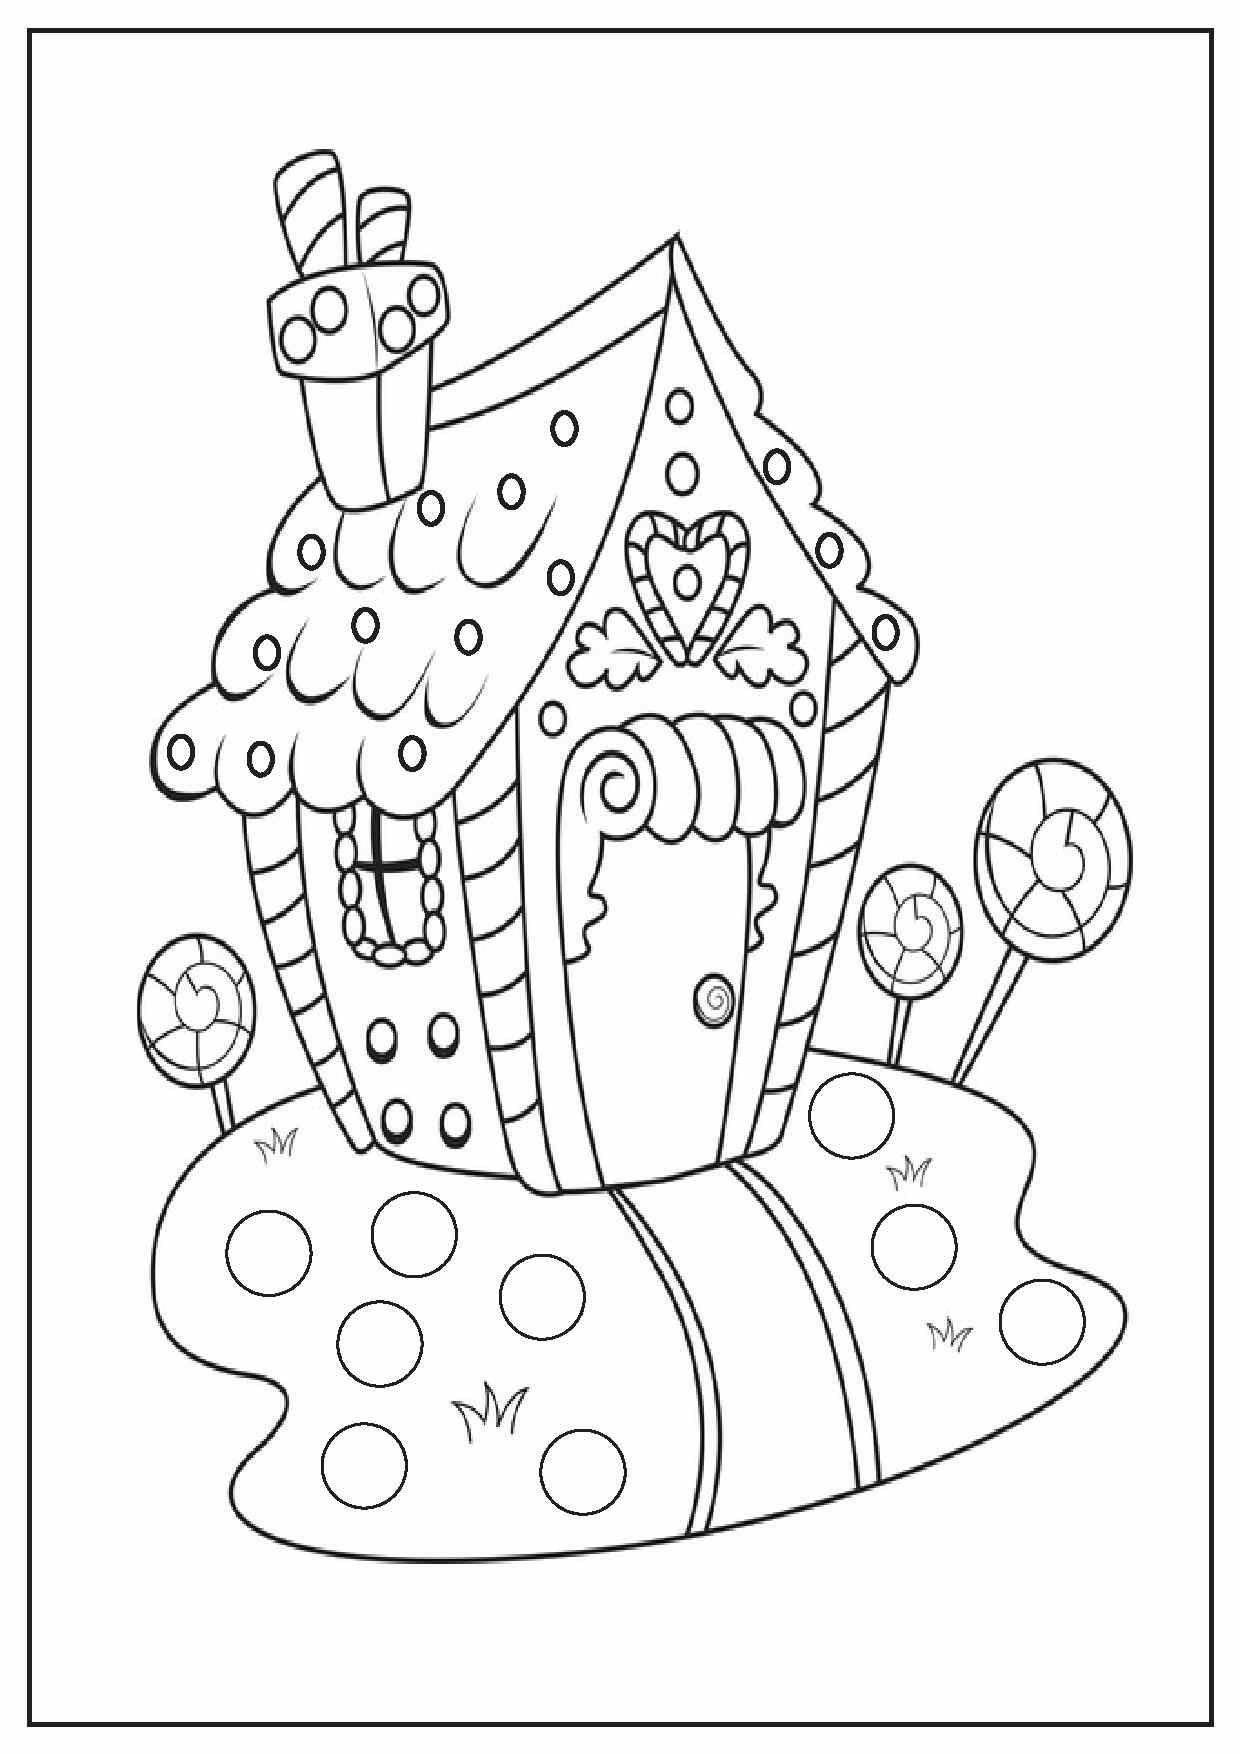 Full Page Christmas Coloring Pages at GetColorings.com | Free printable